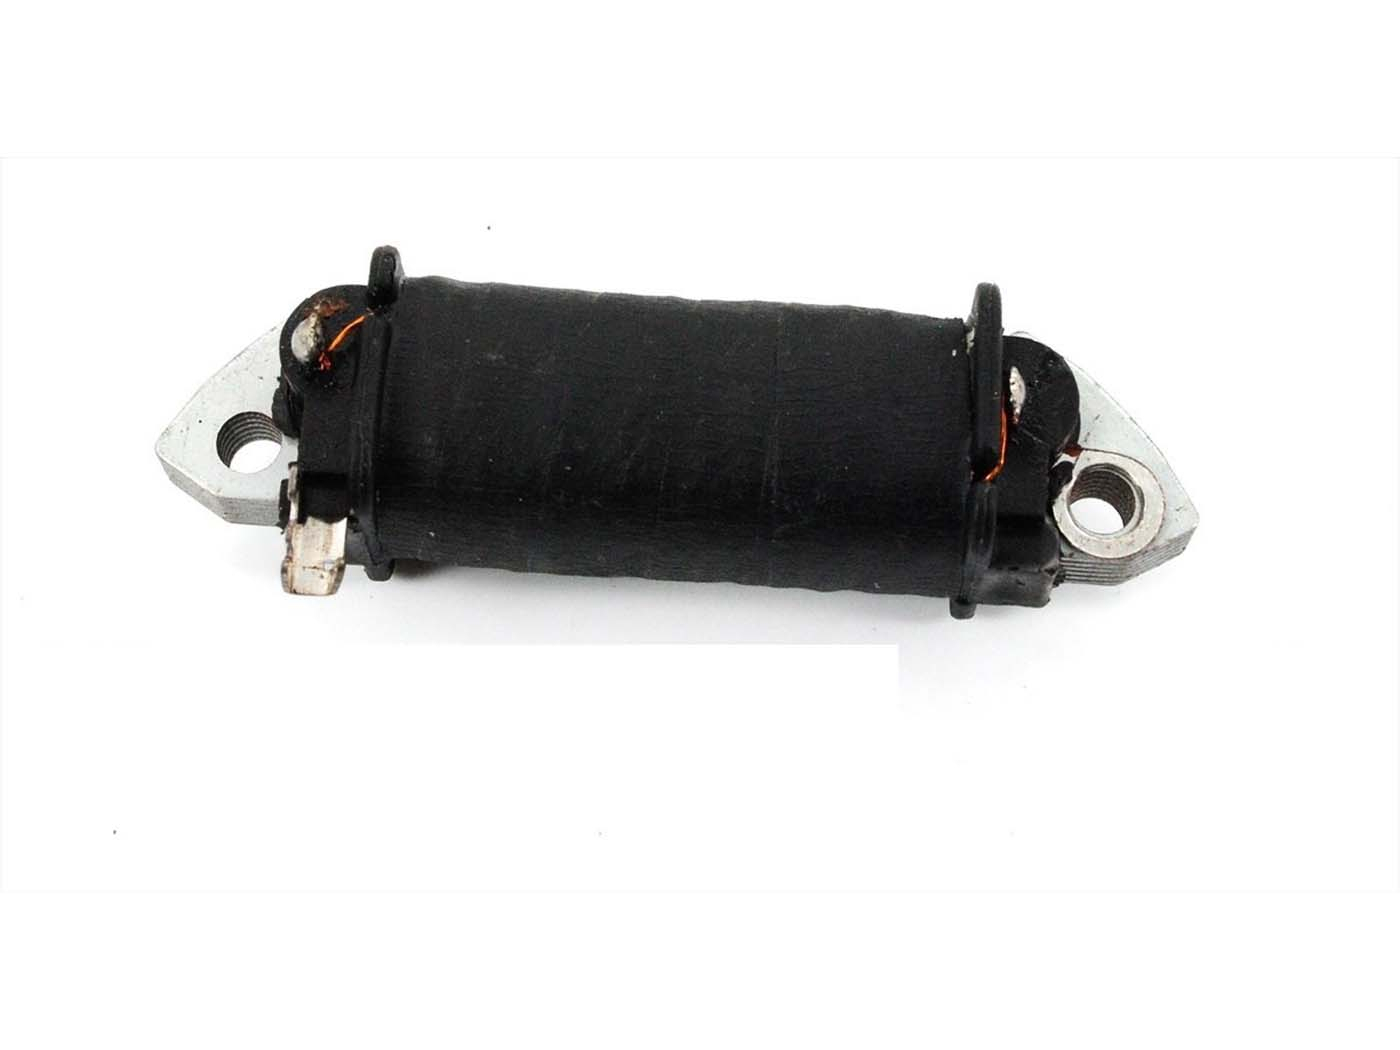 Primary Current Coil Compatible For Honda MT MB 50